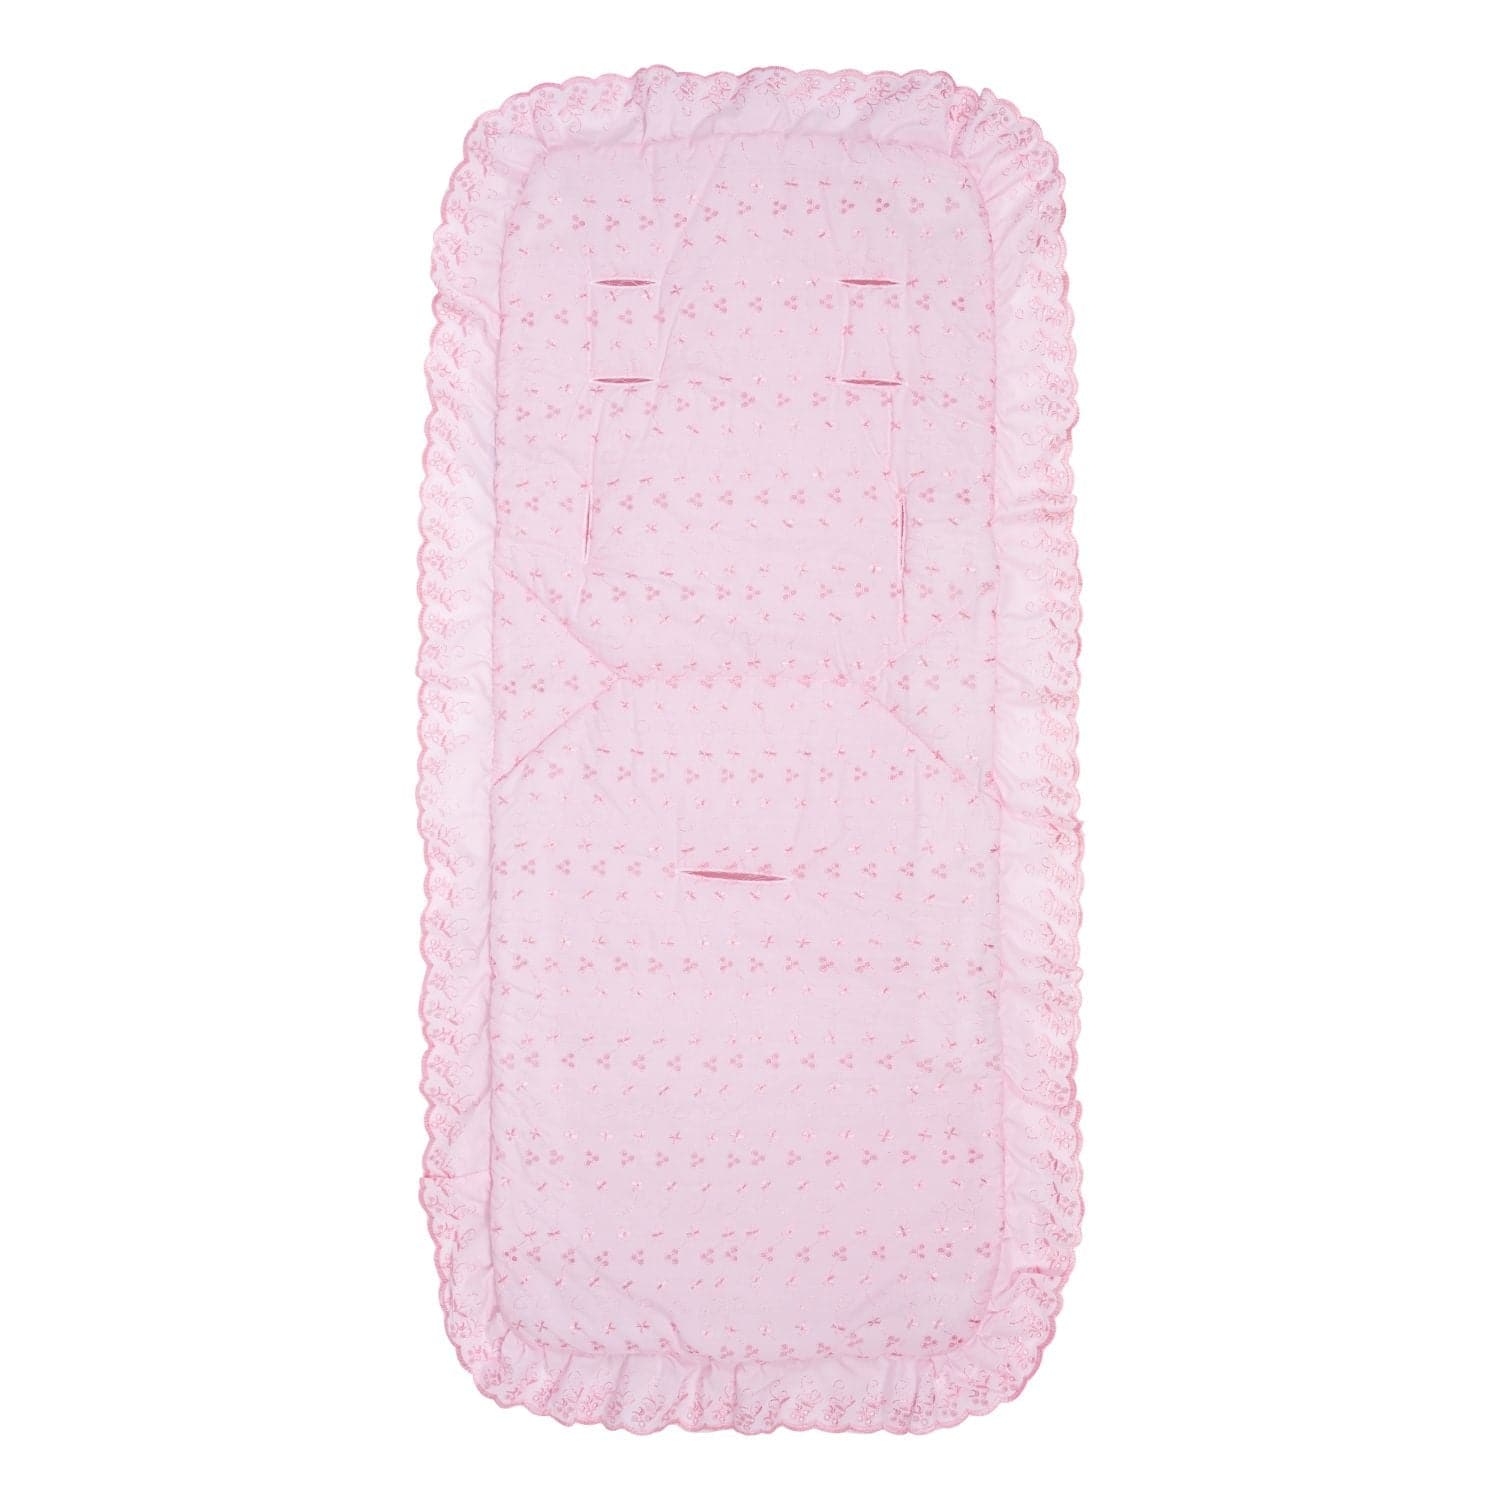 Broderie Anglaise Pushchair Seat Liner Compatible with Bebecar - Fits All Models - For Your Little One